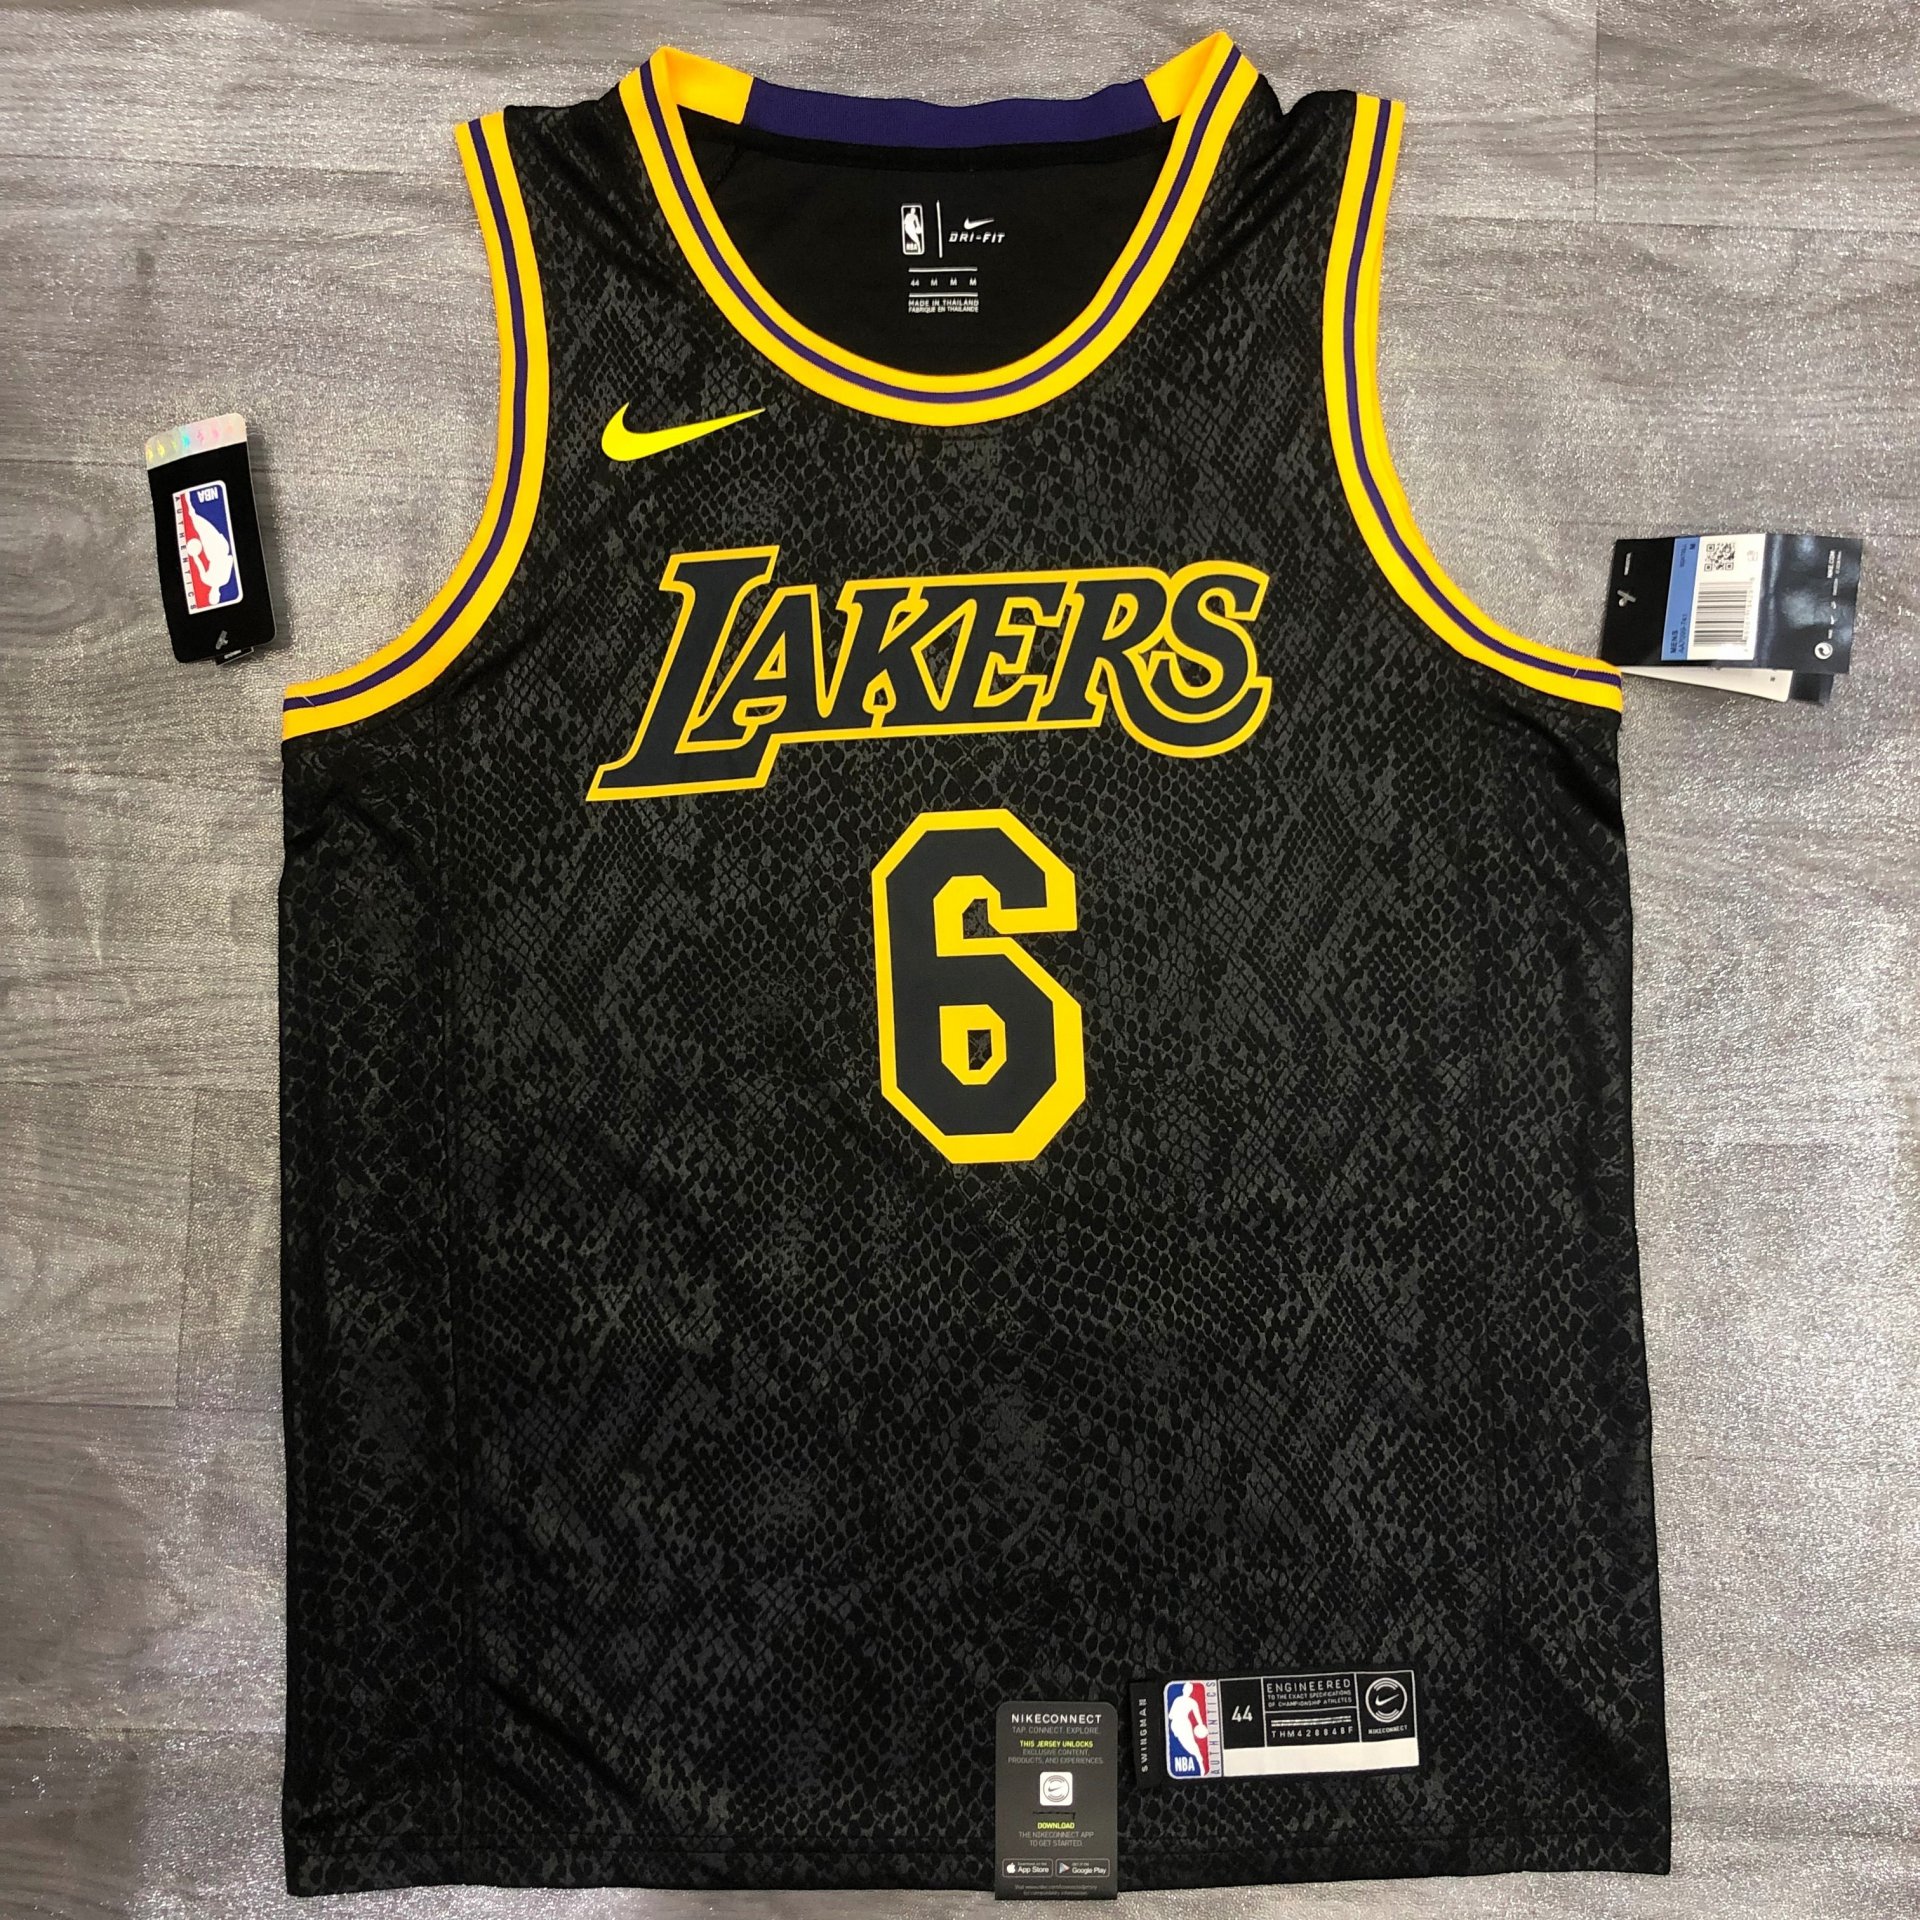 Lakers Jerseys Tshirts - Buy Lakers Jerseys Tshirts online in India